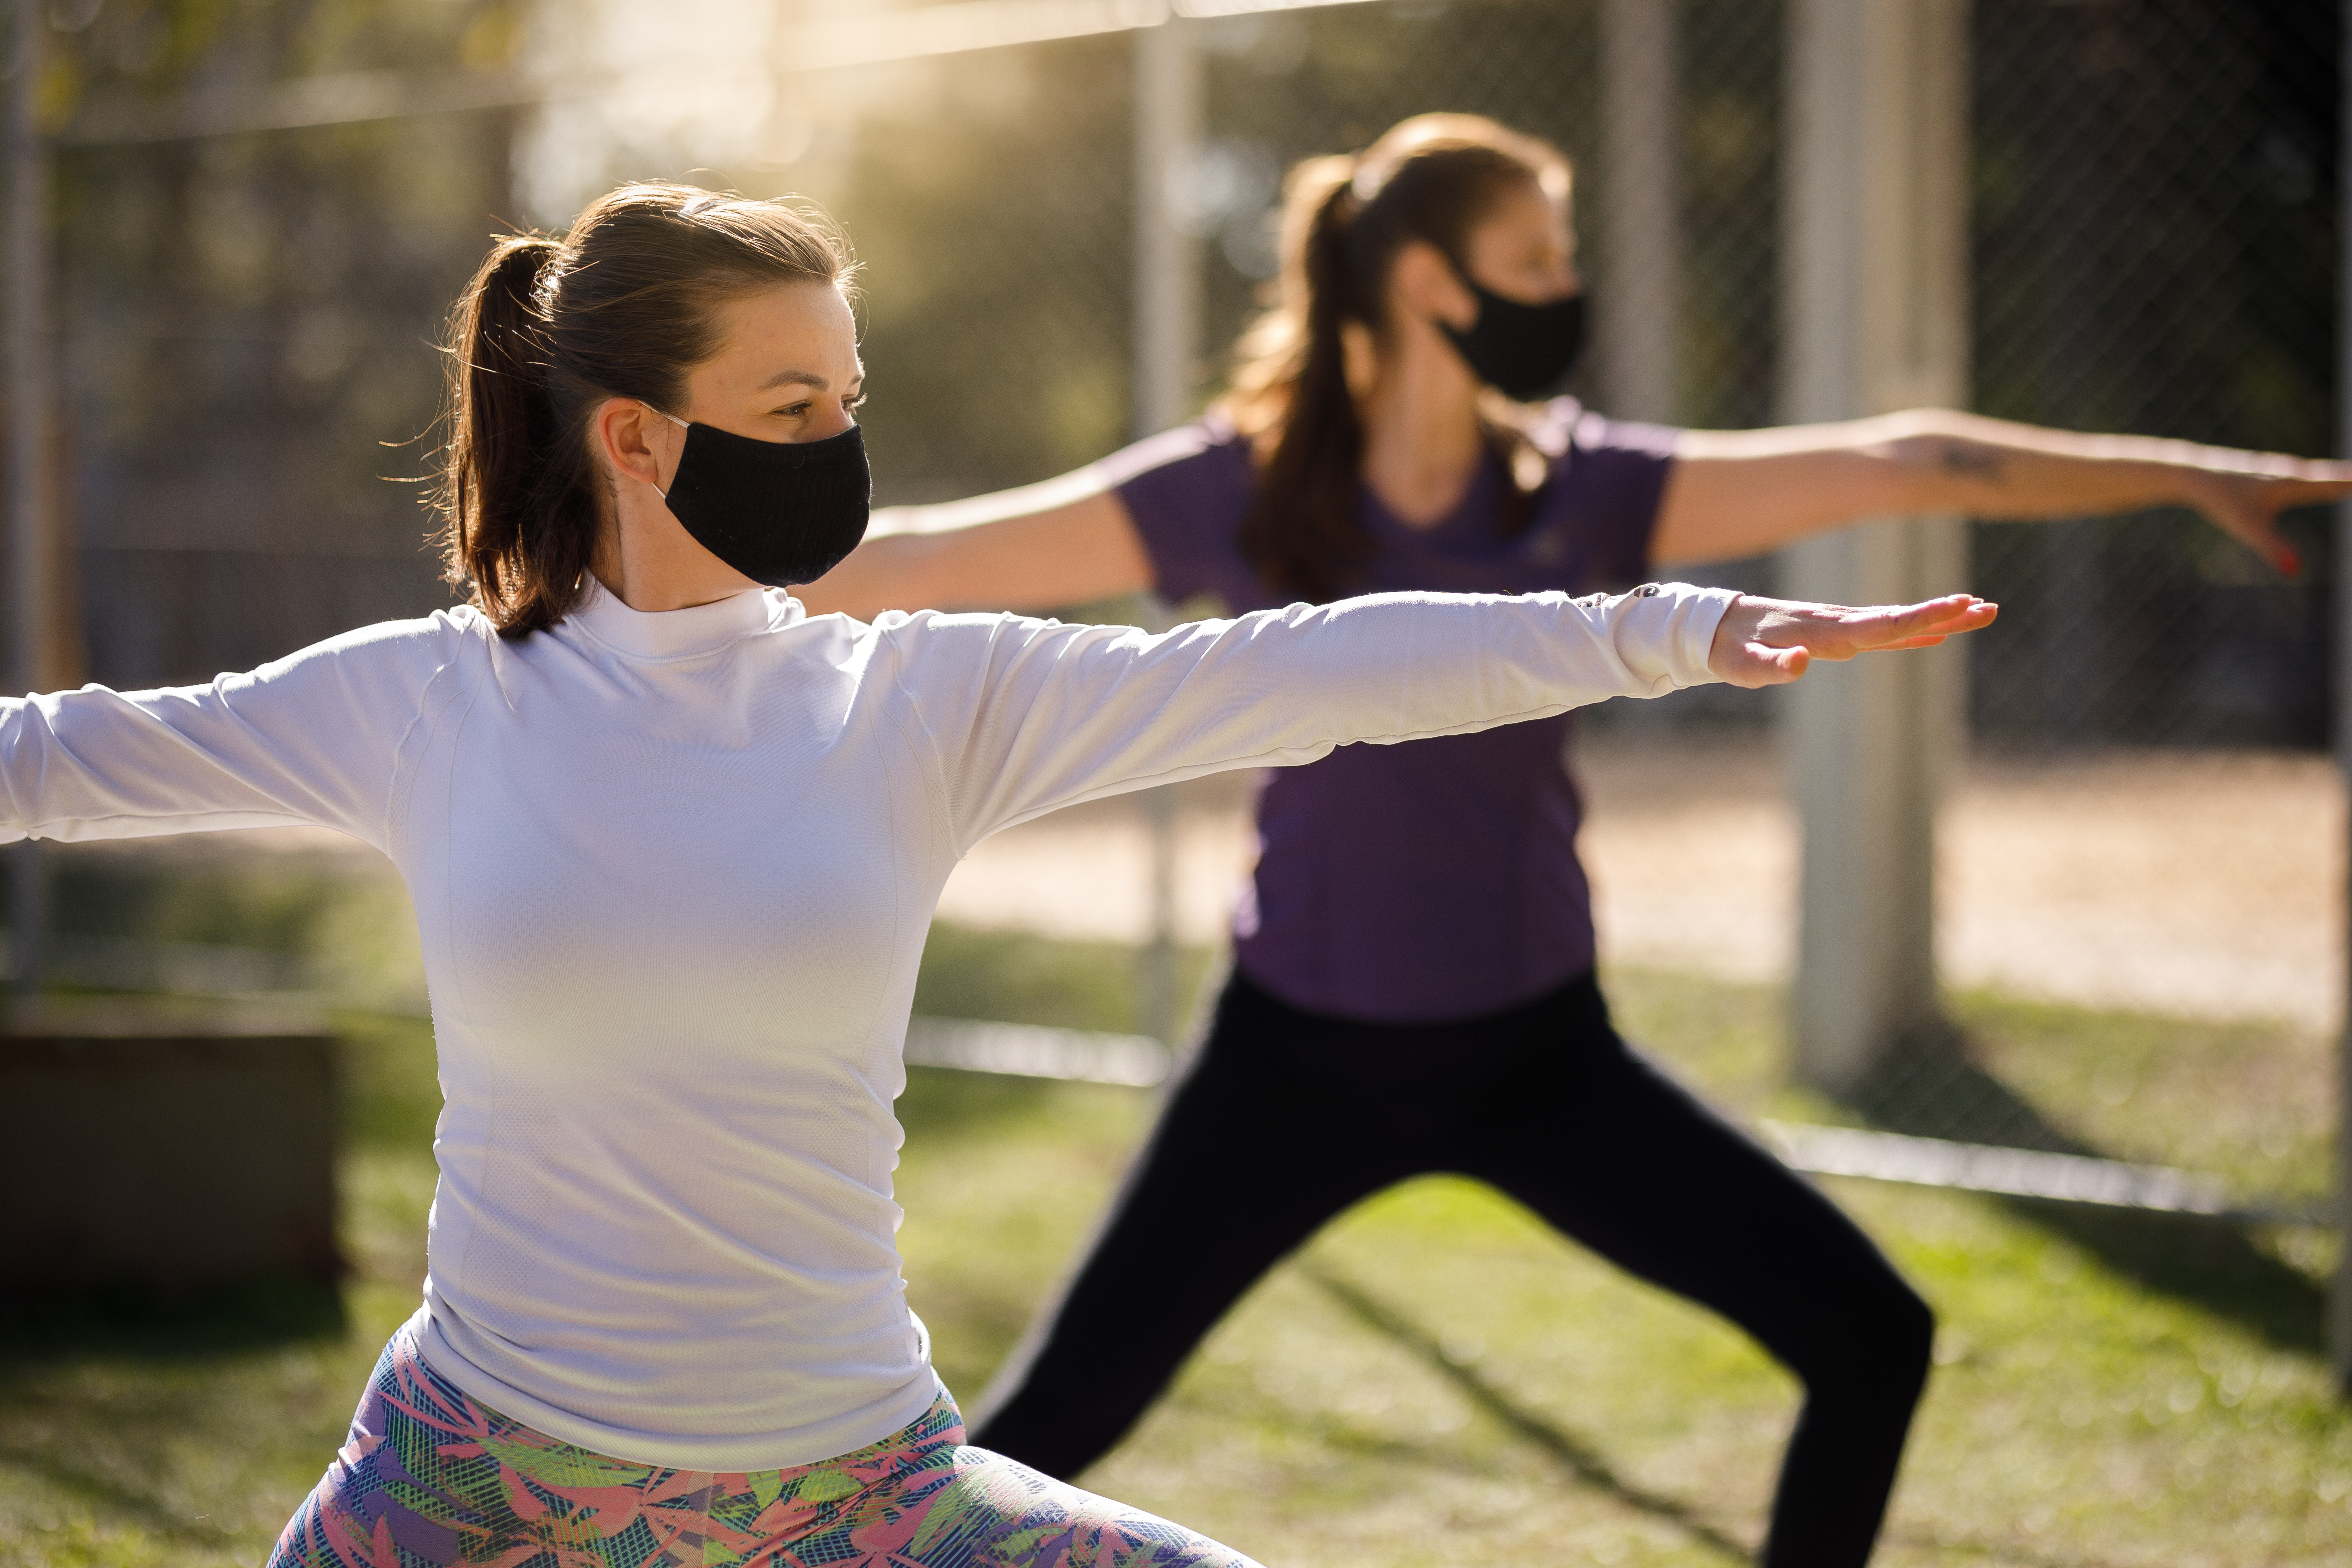 women doing yoga with masks on in a park